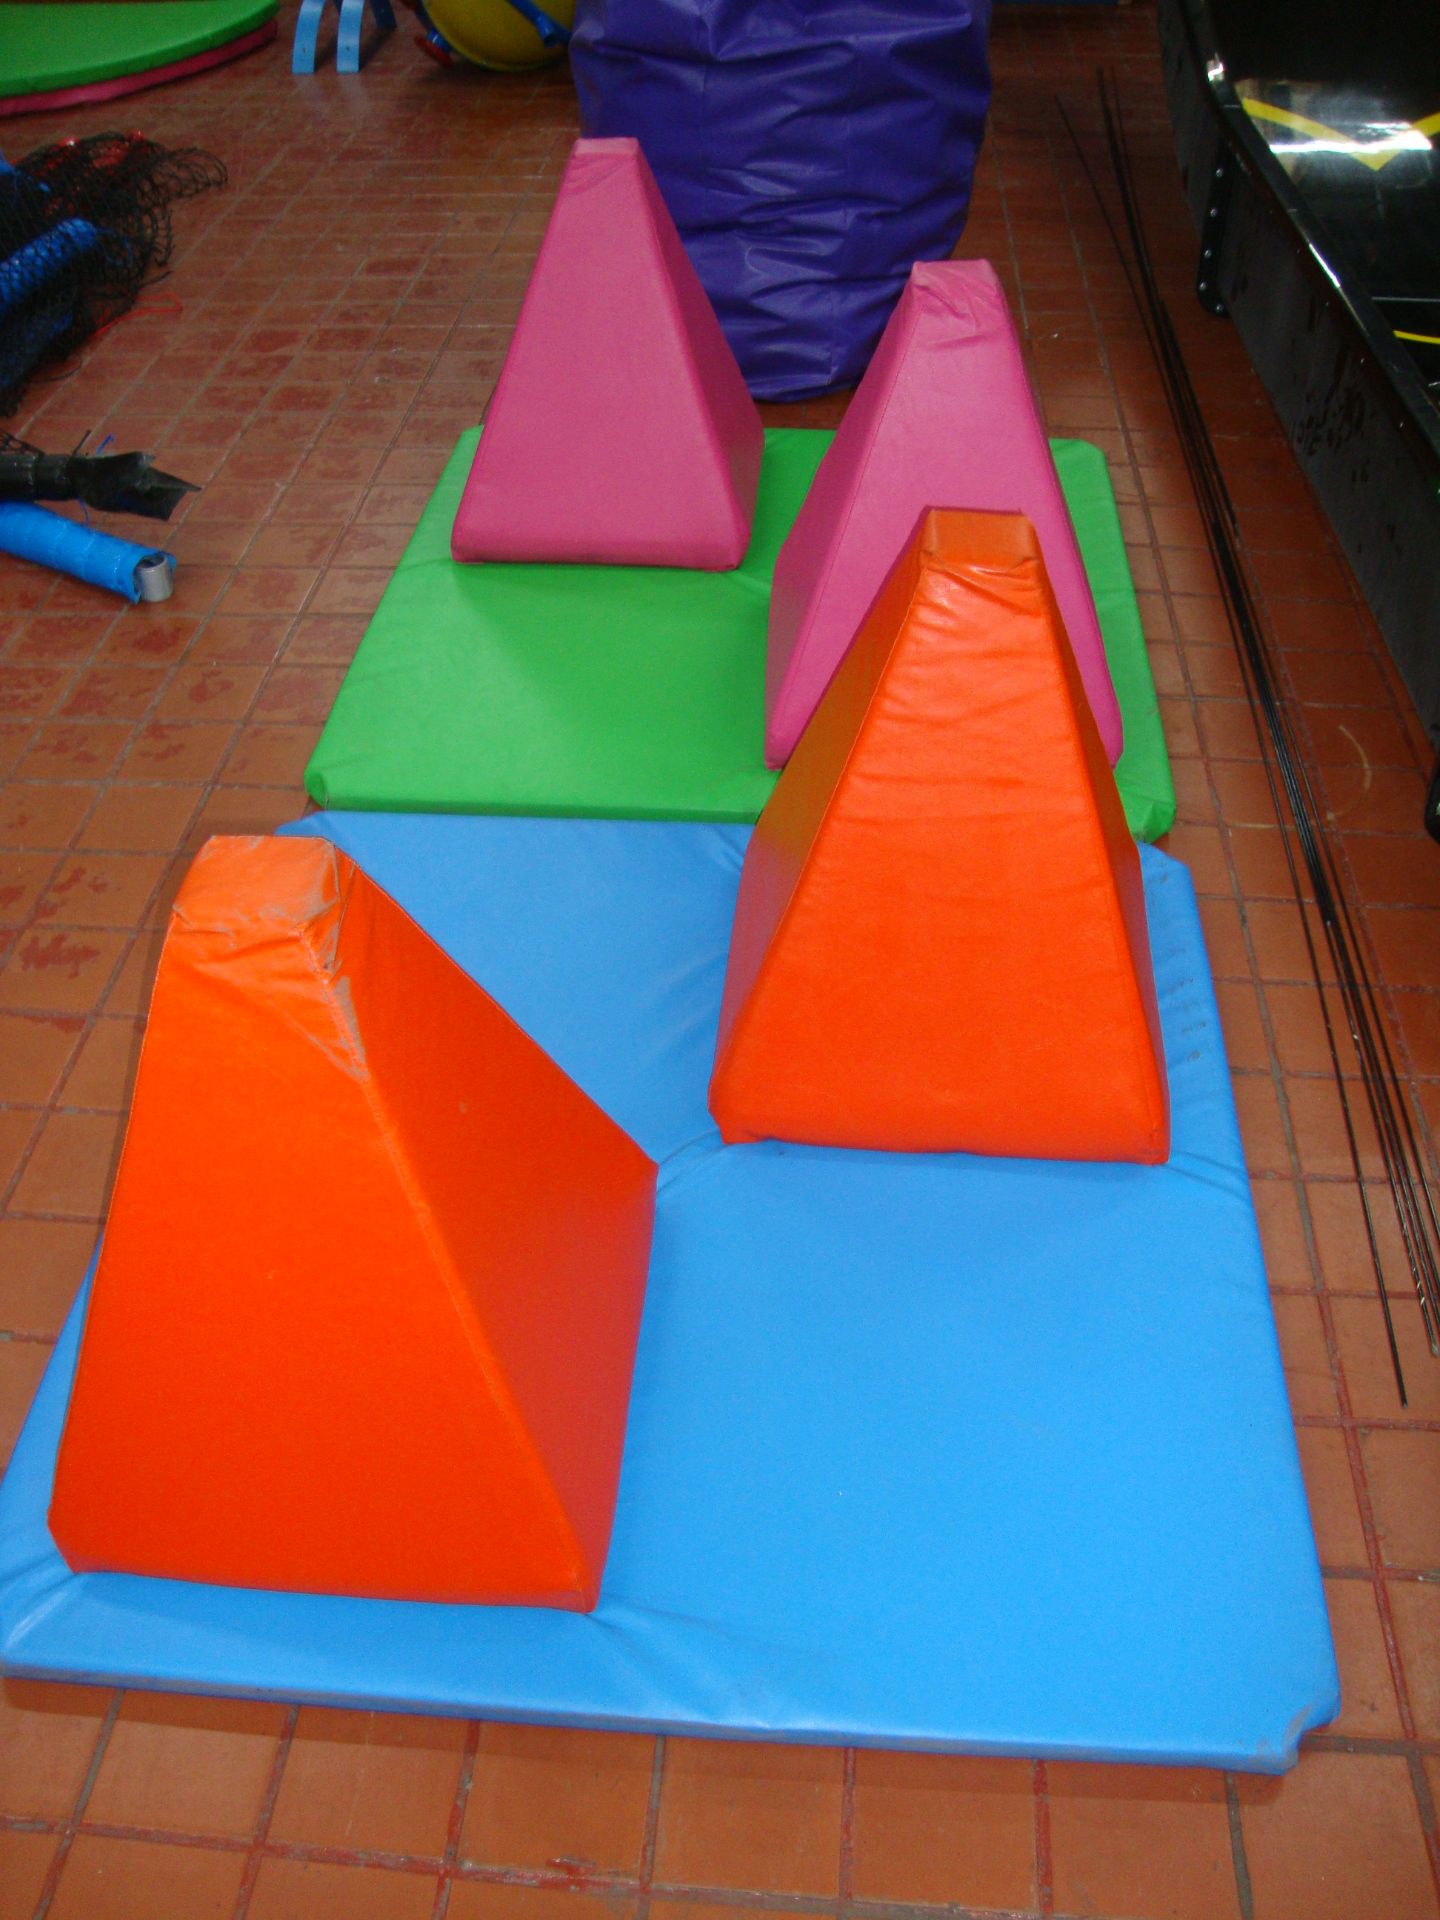 Soft Play Equipment - Image 11 of 25